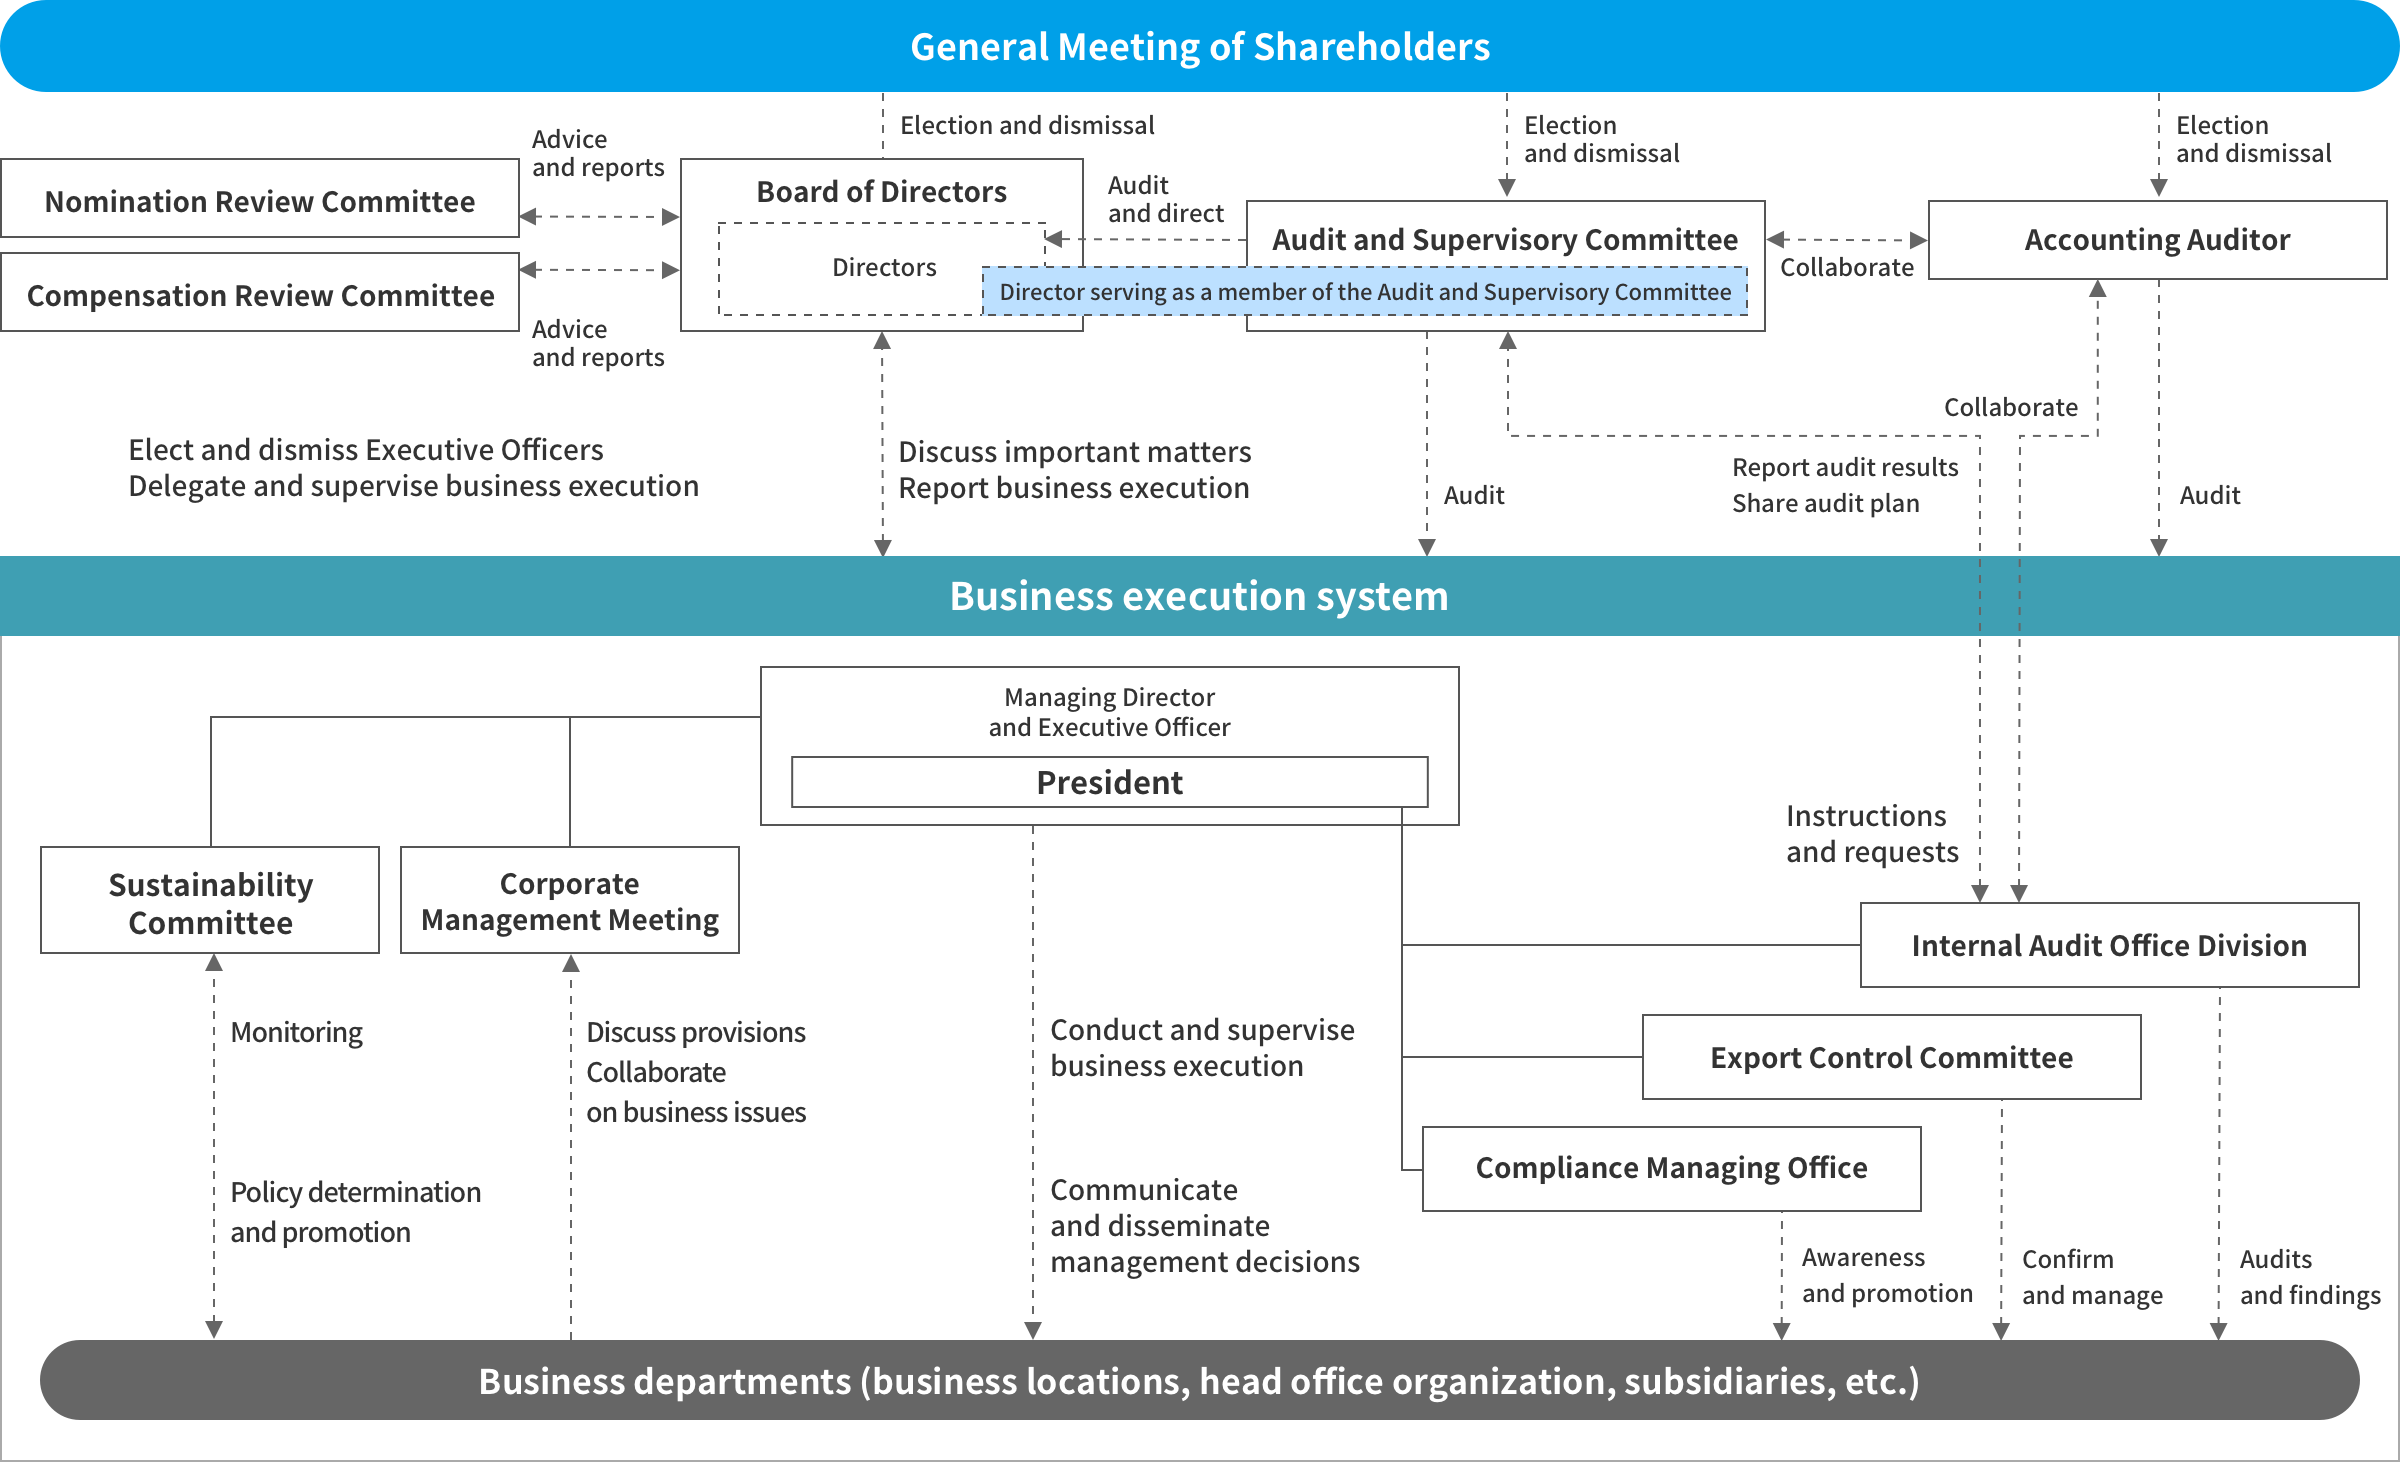 Overview of Corporate Governance System